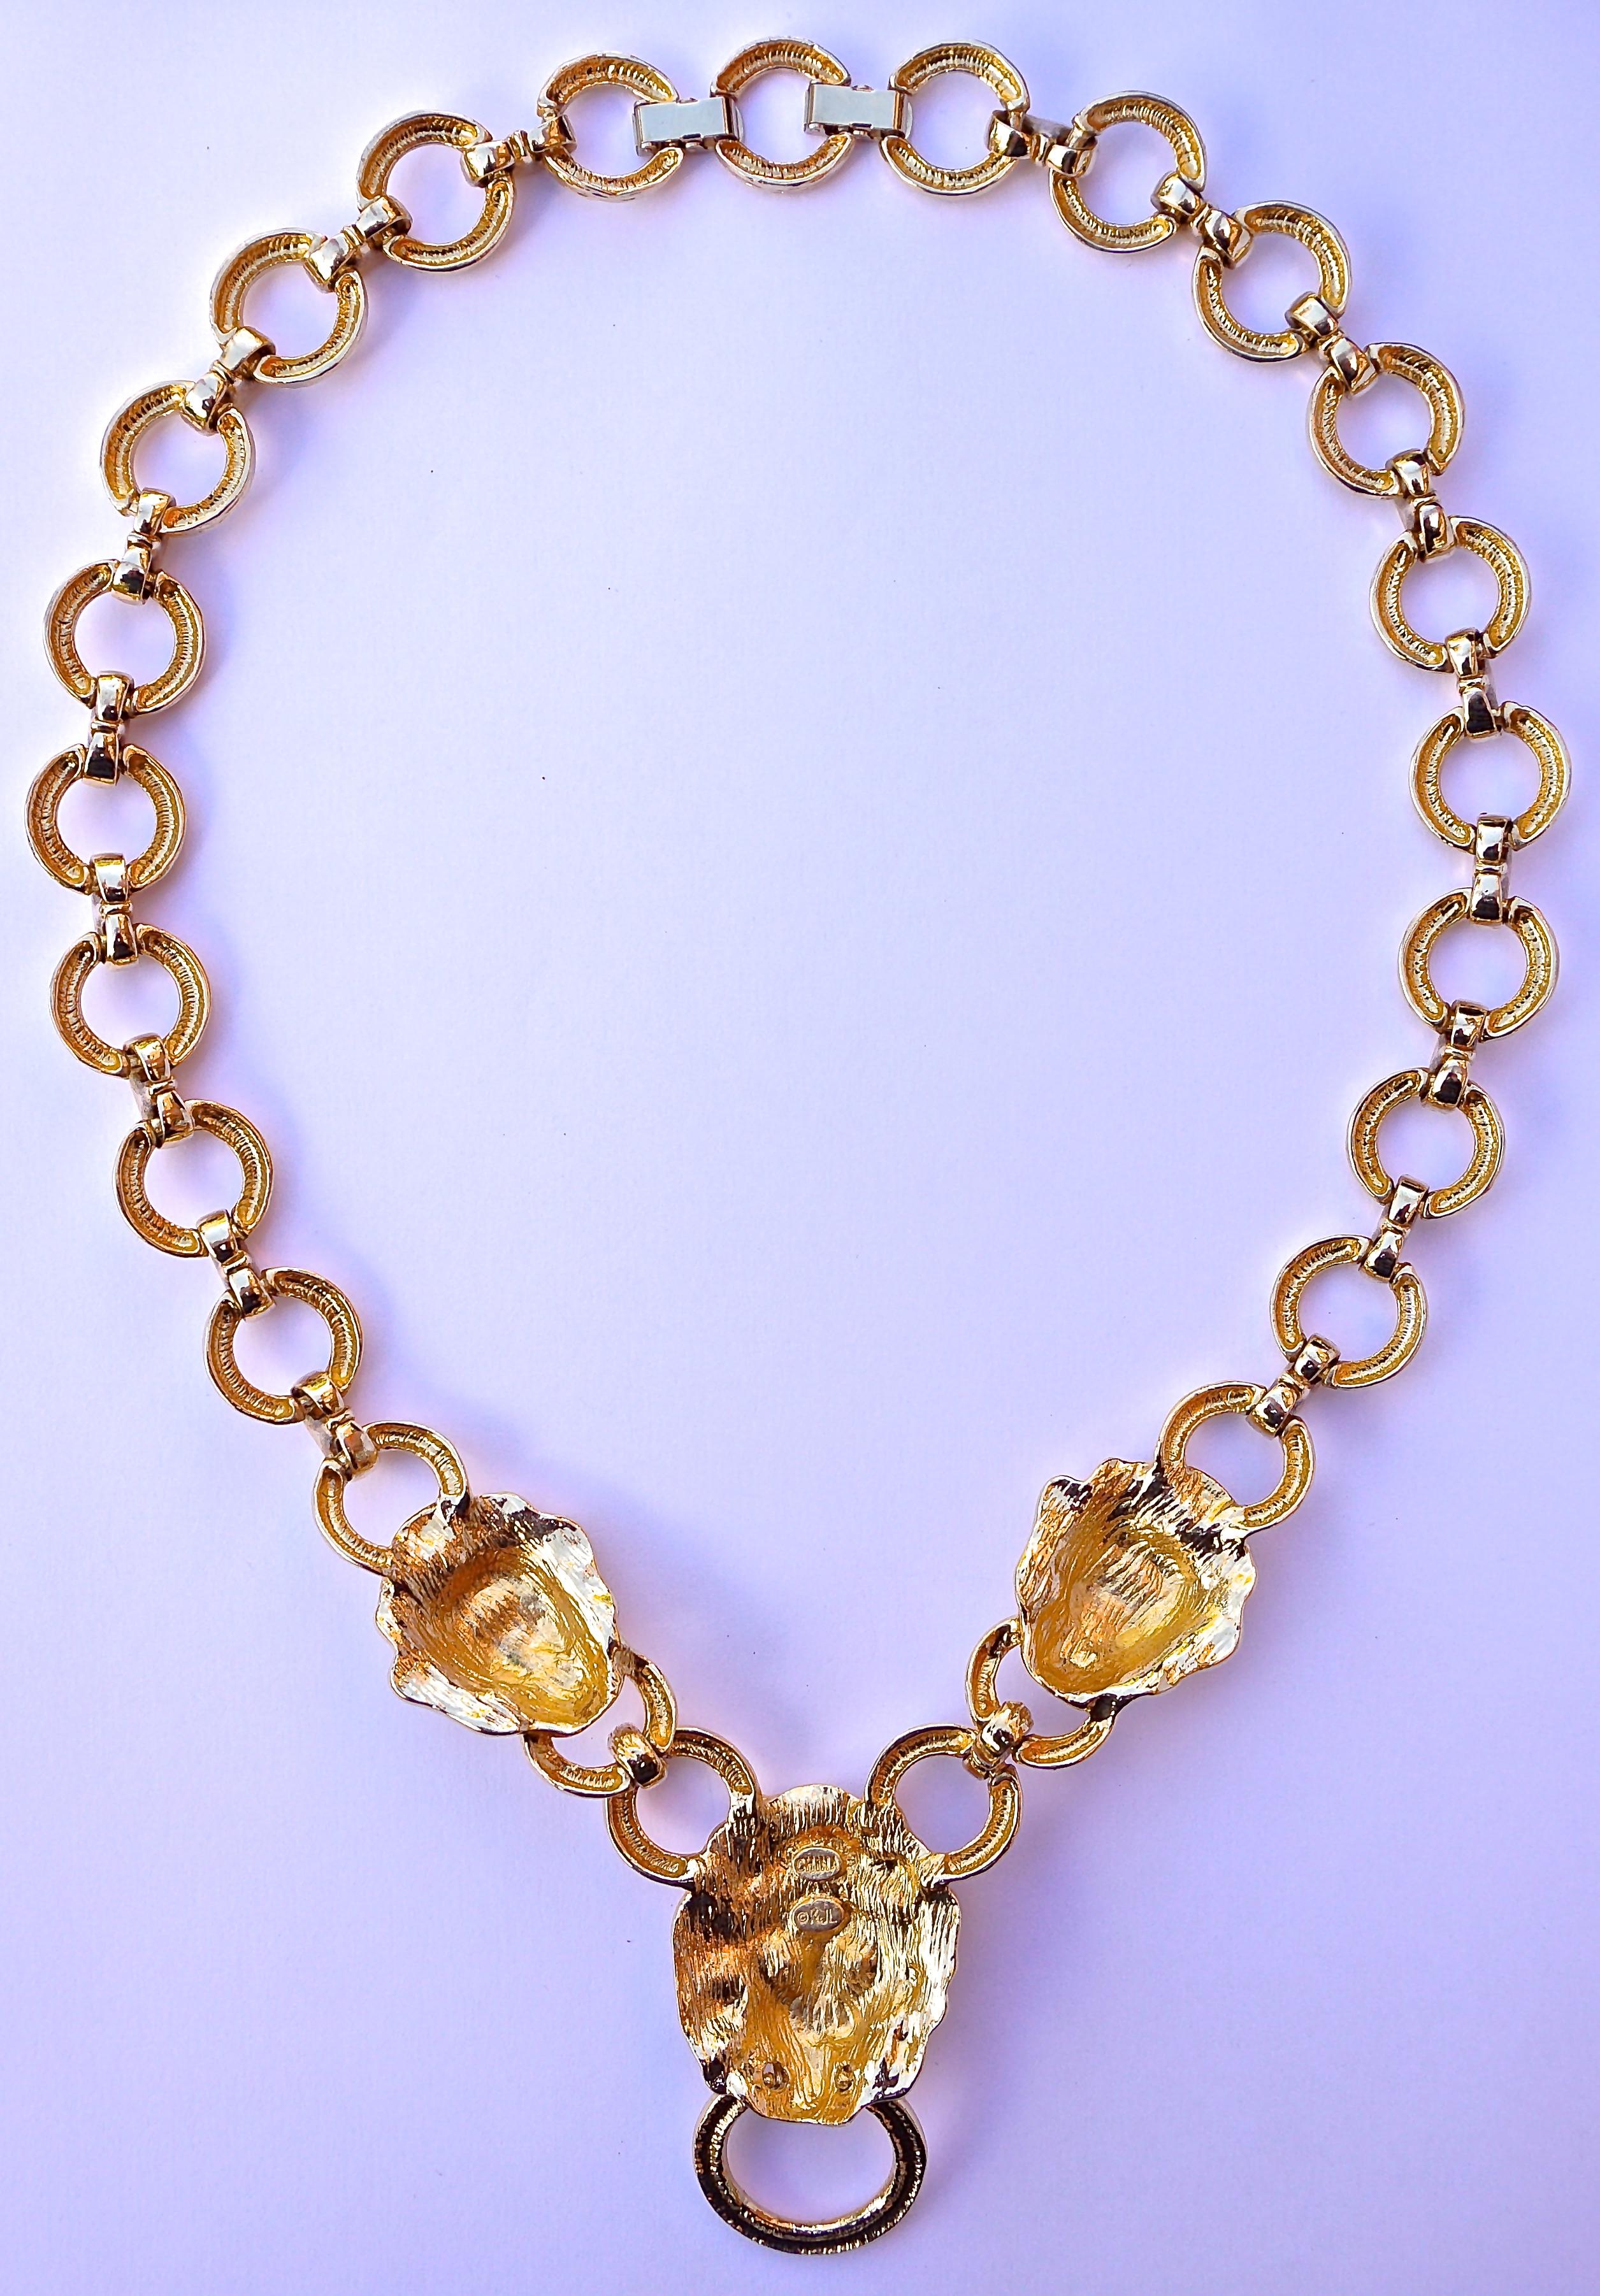 Fabulous Kenneth Jay Lane 1990s gold plated necklace, featuring three doorknocker lions heads, and textured link chain. It is stamped KJL© China, and has a removable clasp closure to adjust the length. The necklace measures length approximately